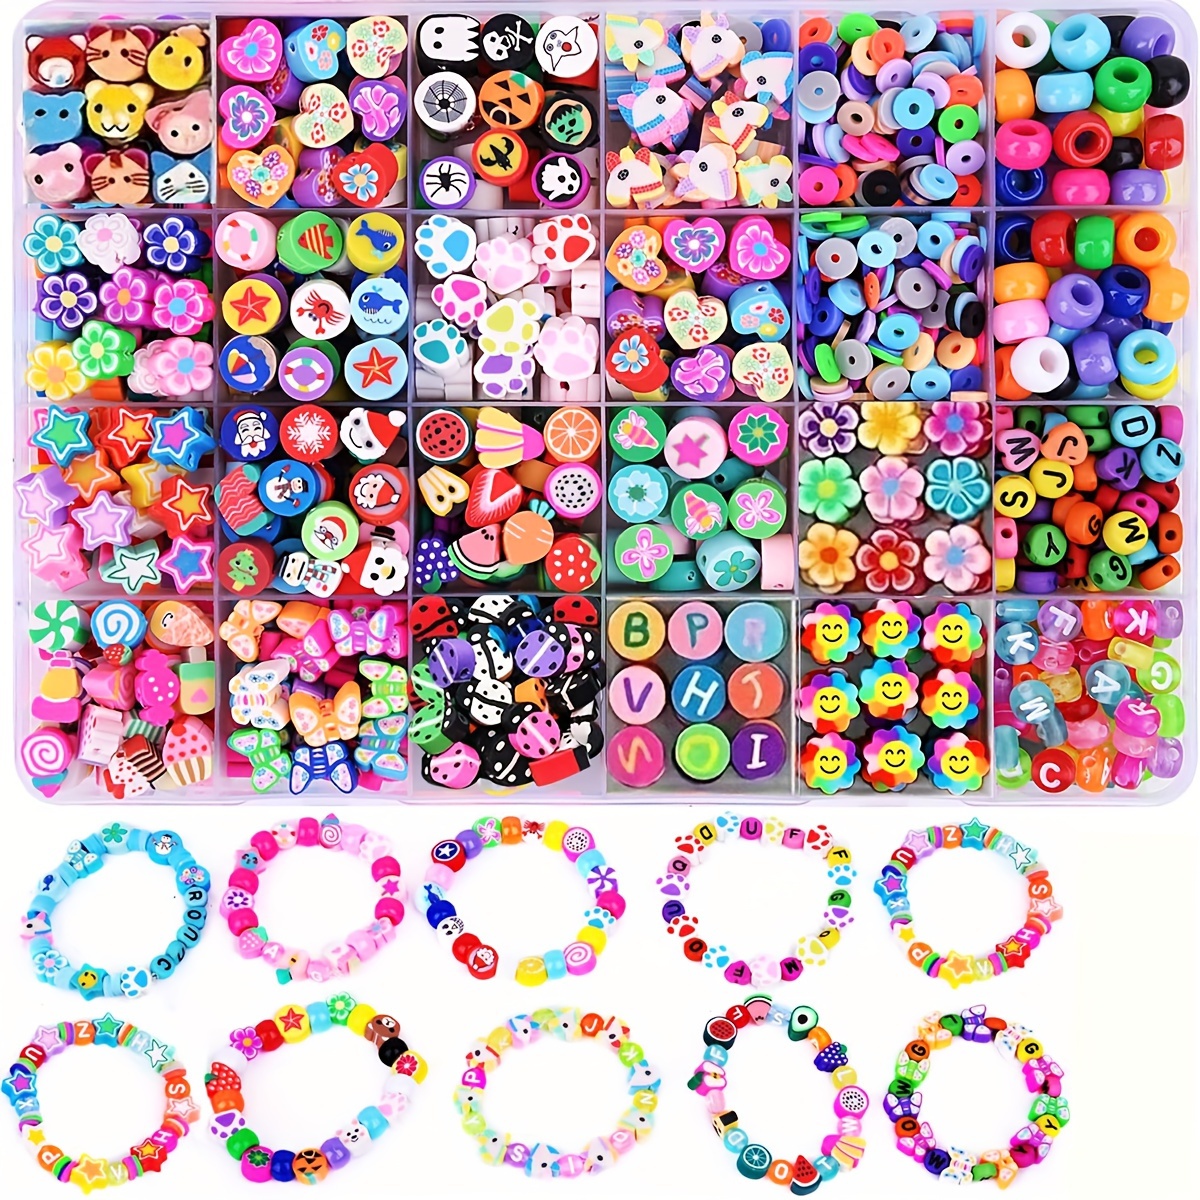 

1000pcs Assorted Polymer Clay Beads & Acrylic Letter Beads Diy Kit, 24 Styles, For Bracelets, Necklaces, Earrings, Anklets, Crafts, Jewelry Making And Charms